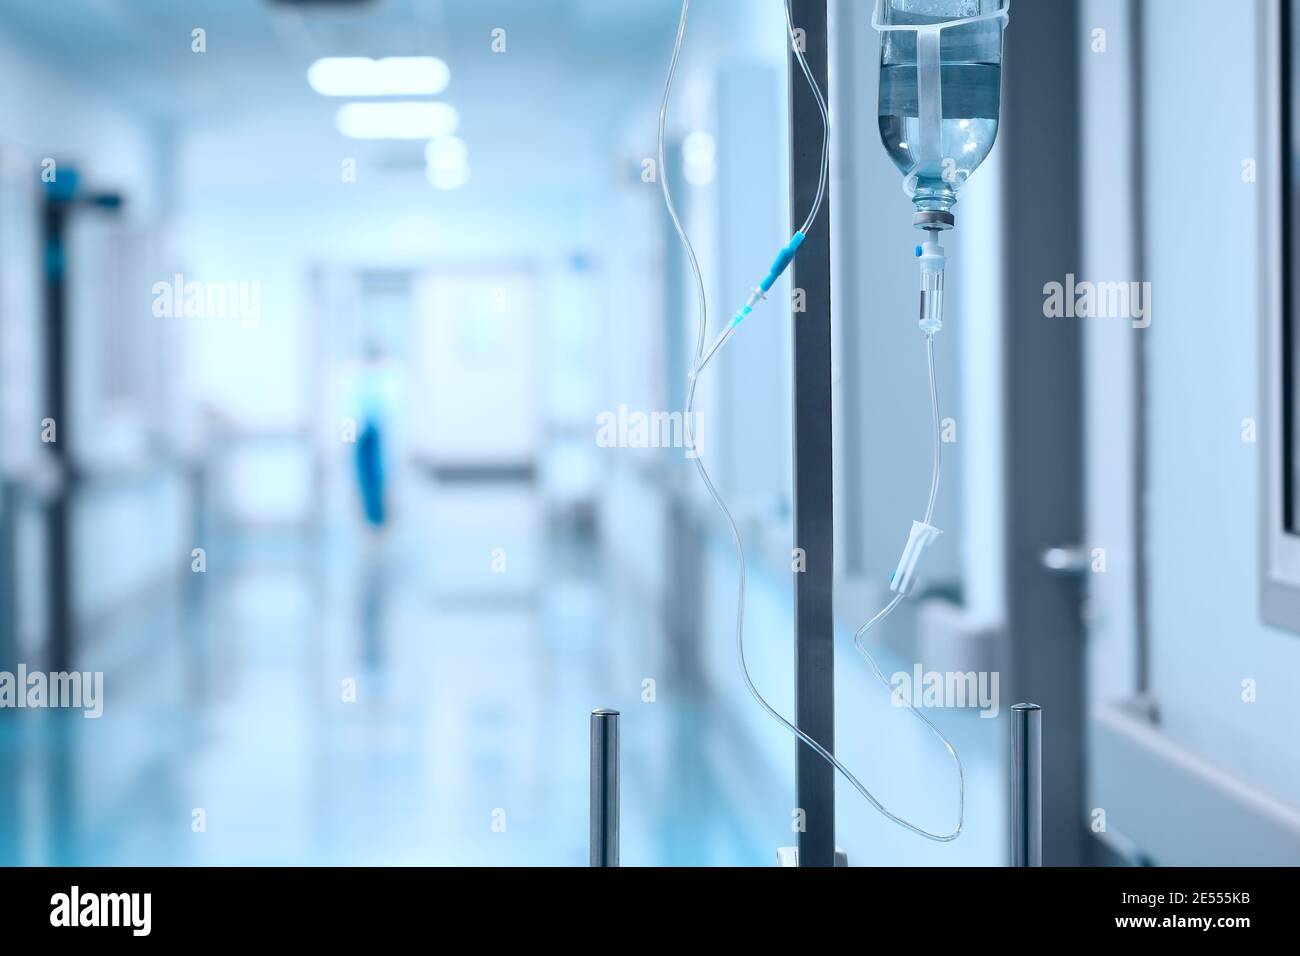 Intravenous drip system in the hospital lobby. Stock Photo